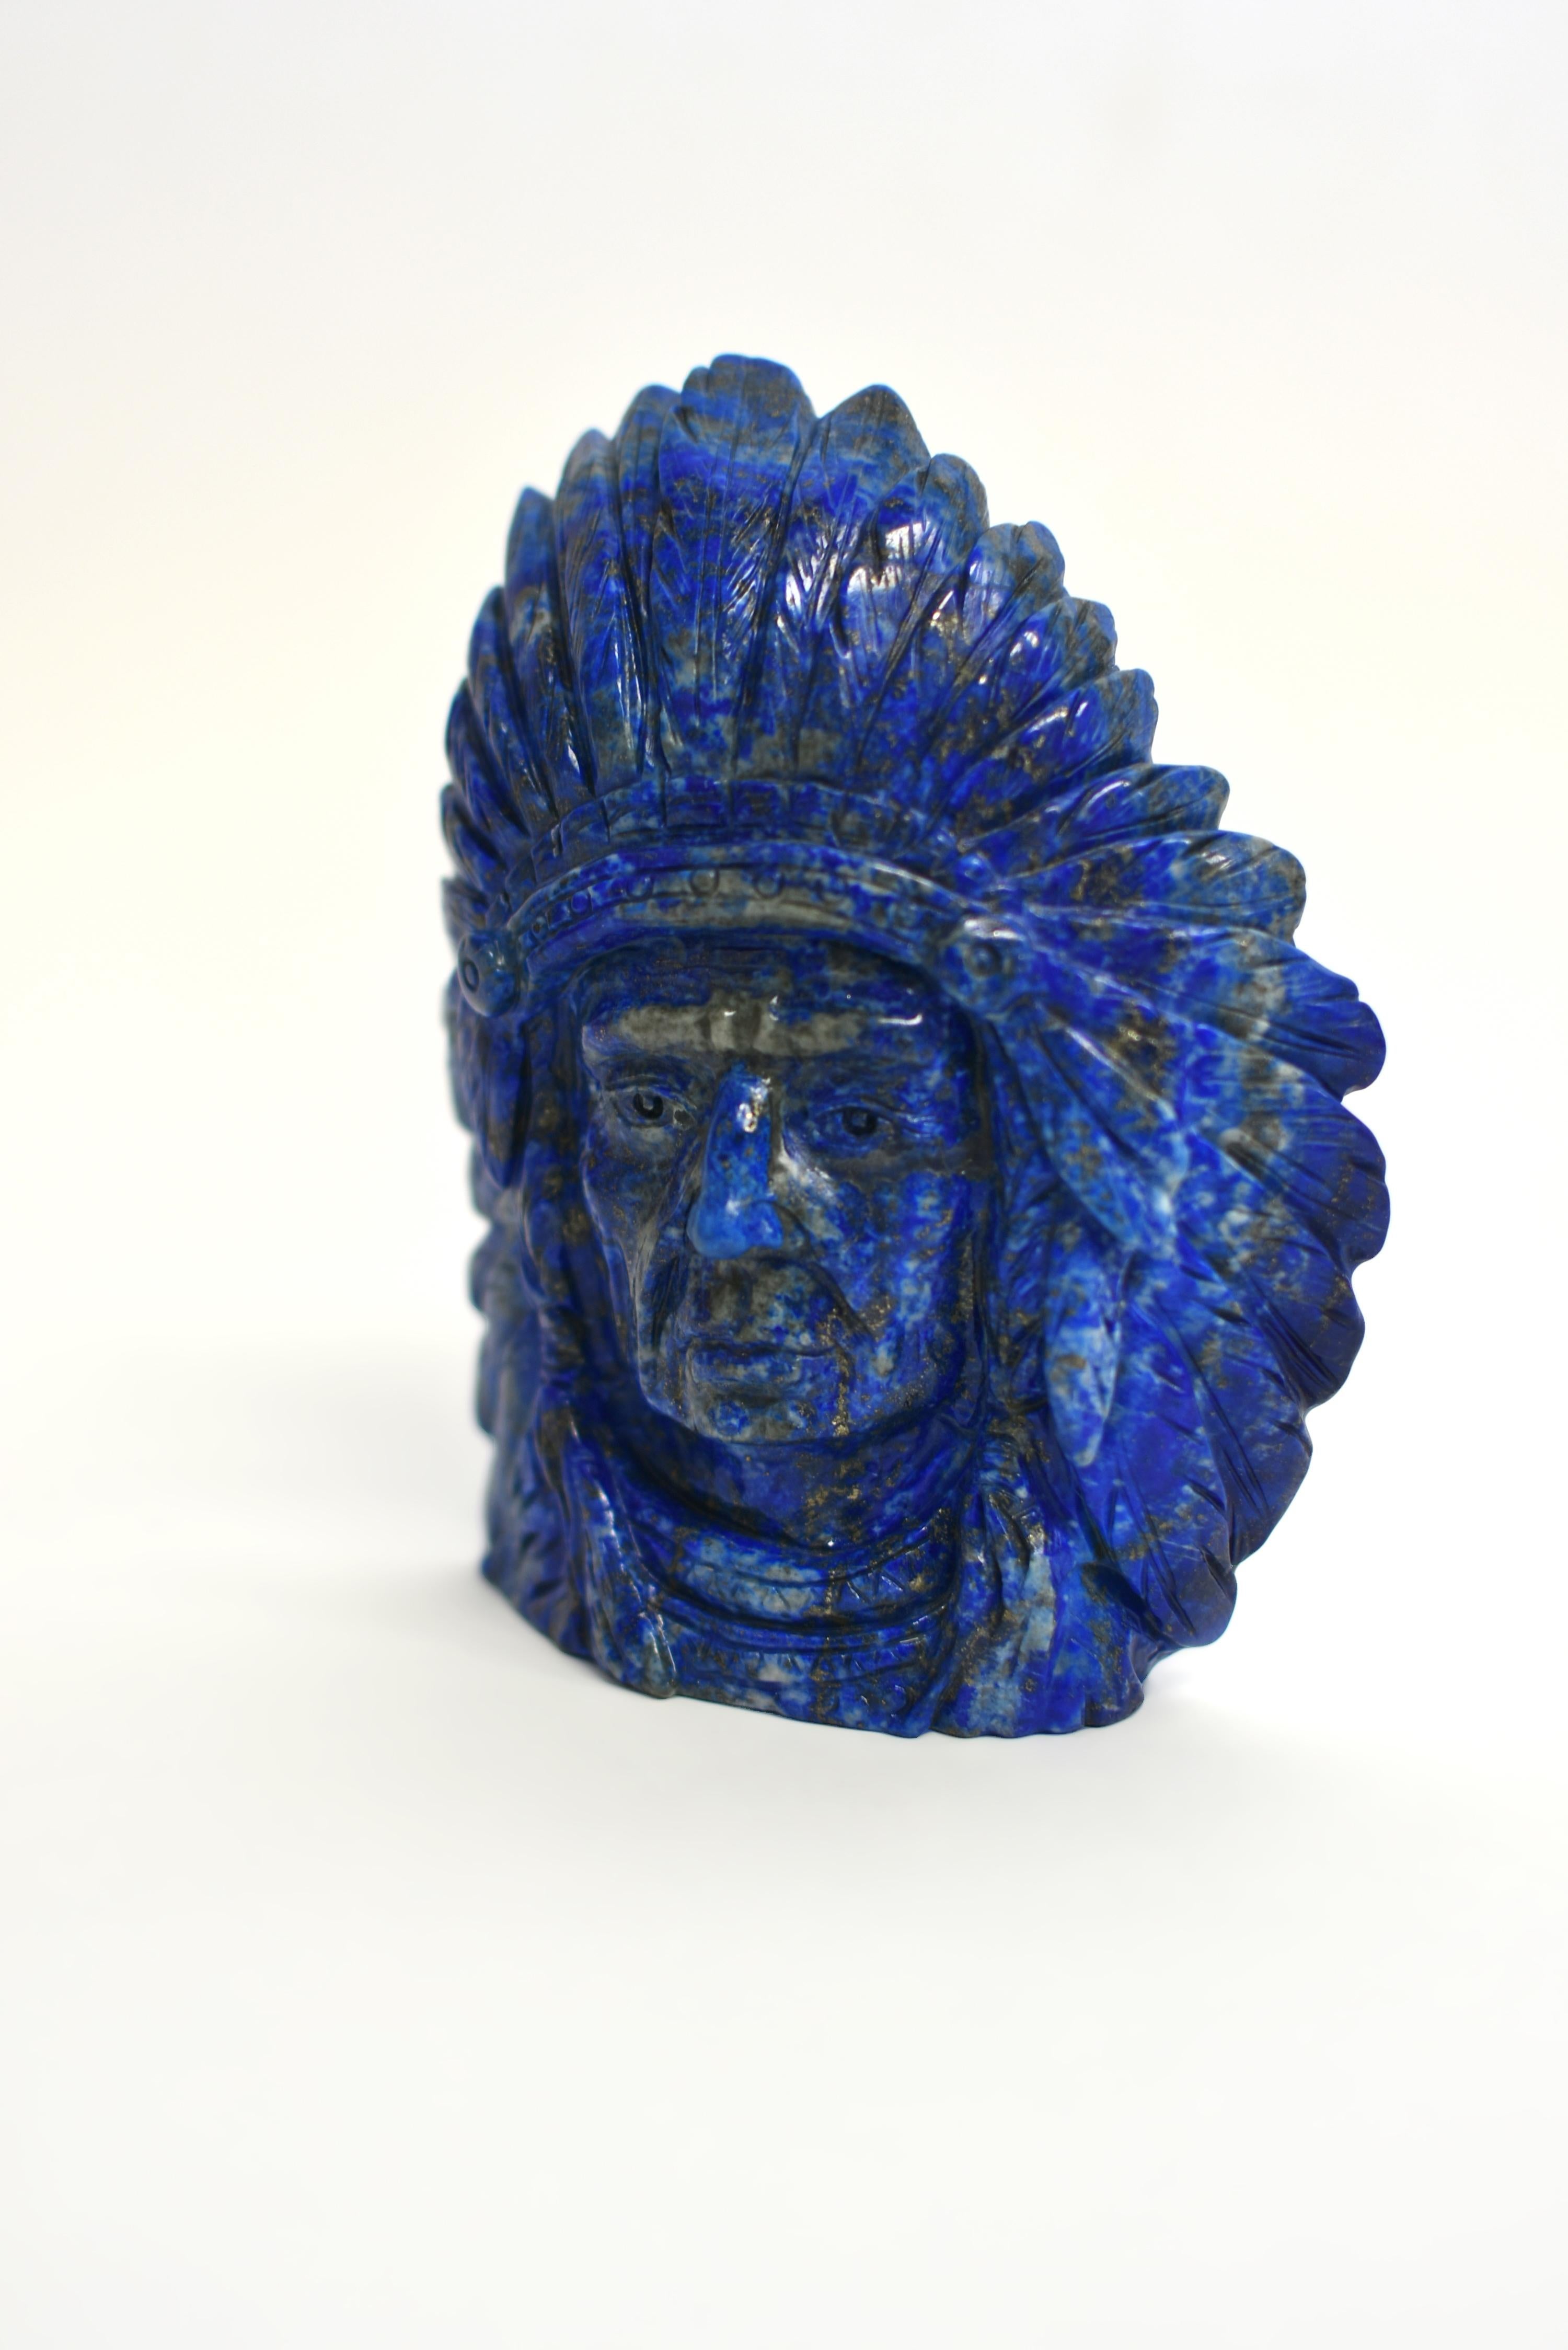 Lapis Lazuli Native American Indian Chief Statue For Sale 9